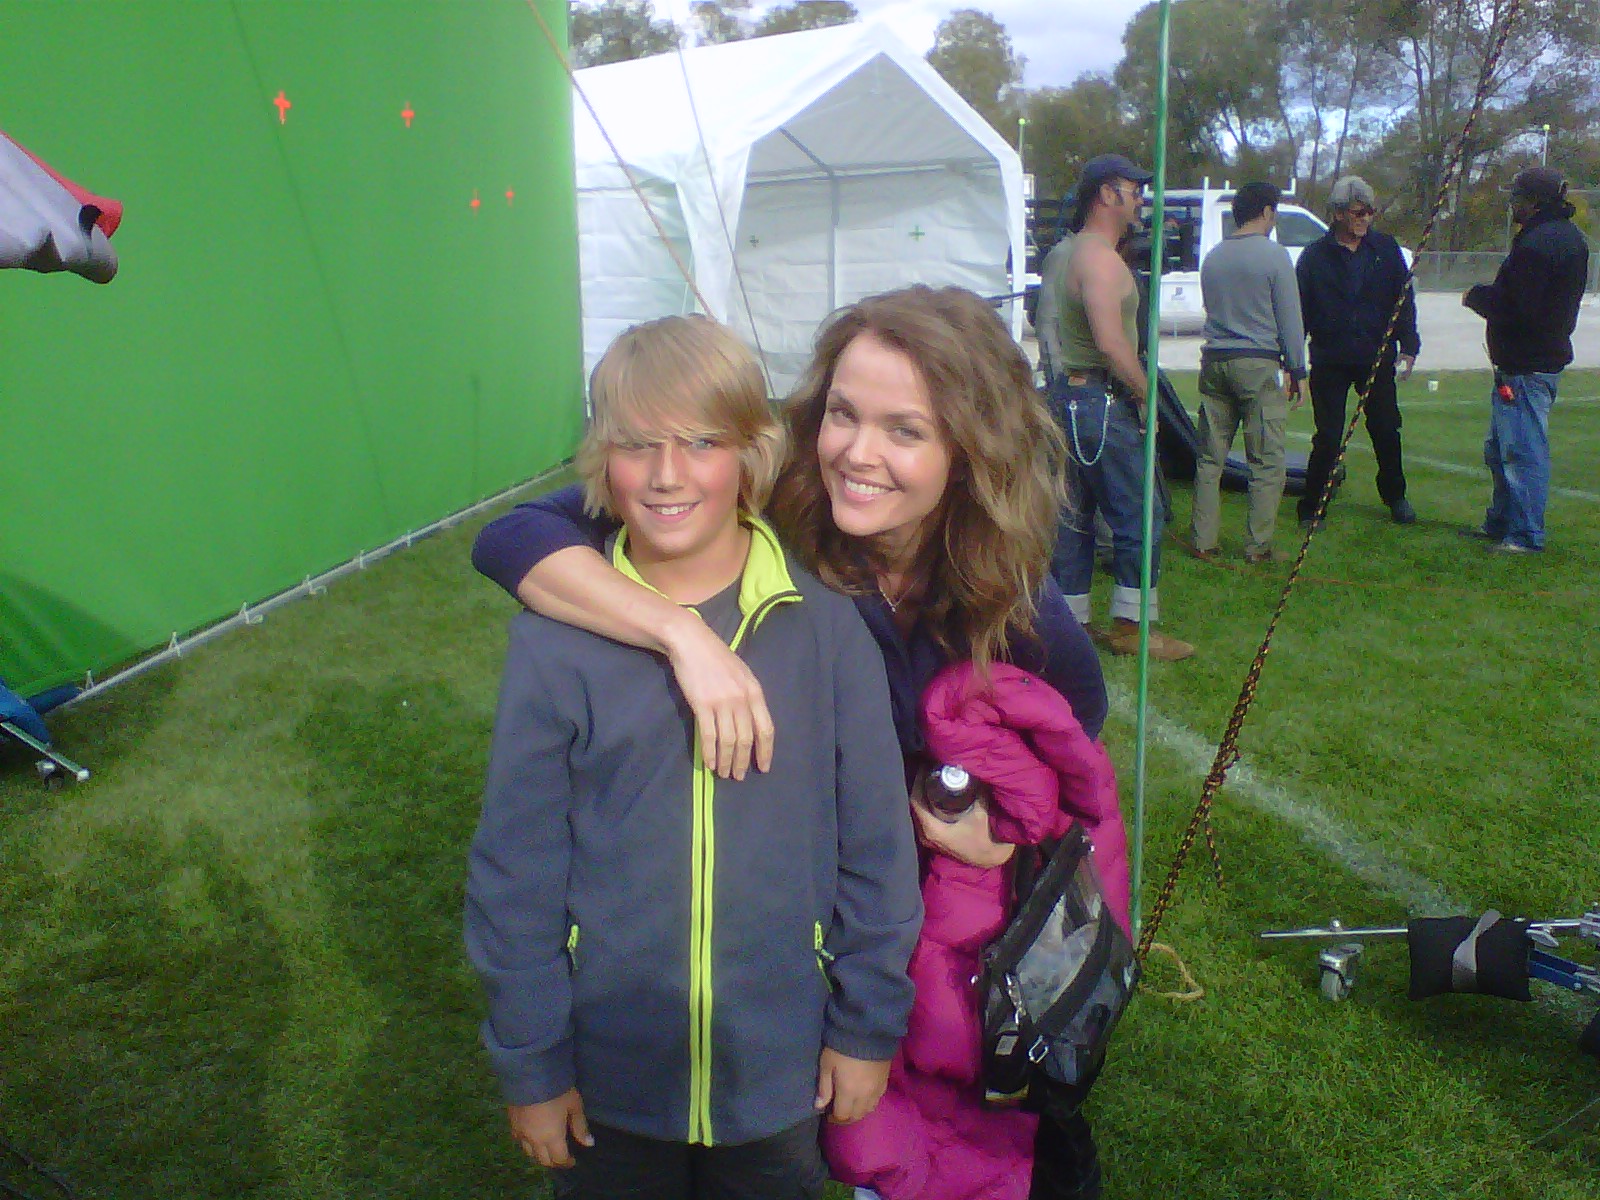 On the set of Golden Shoes with Dina Meyer